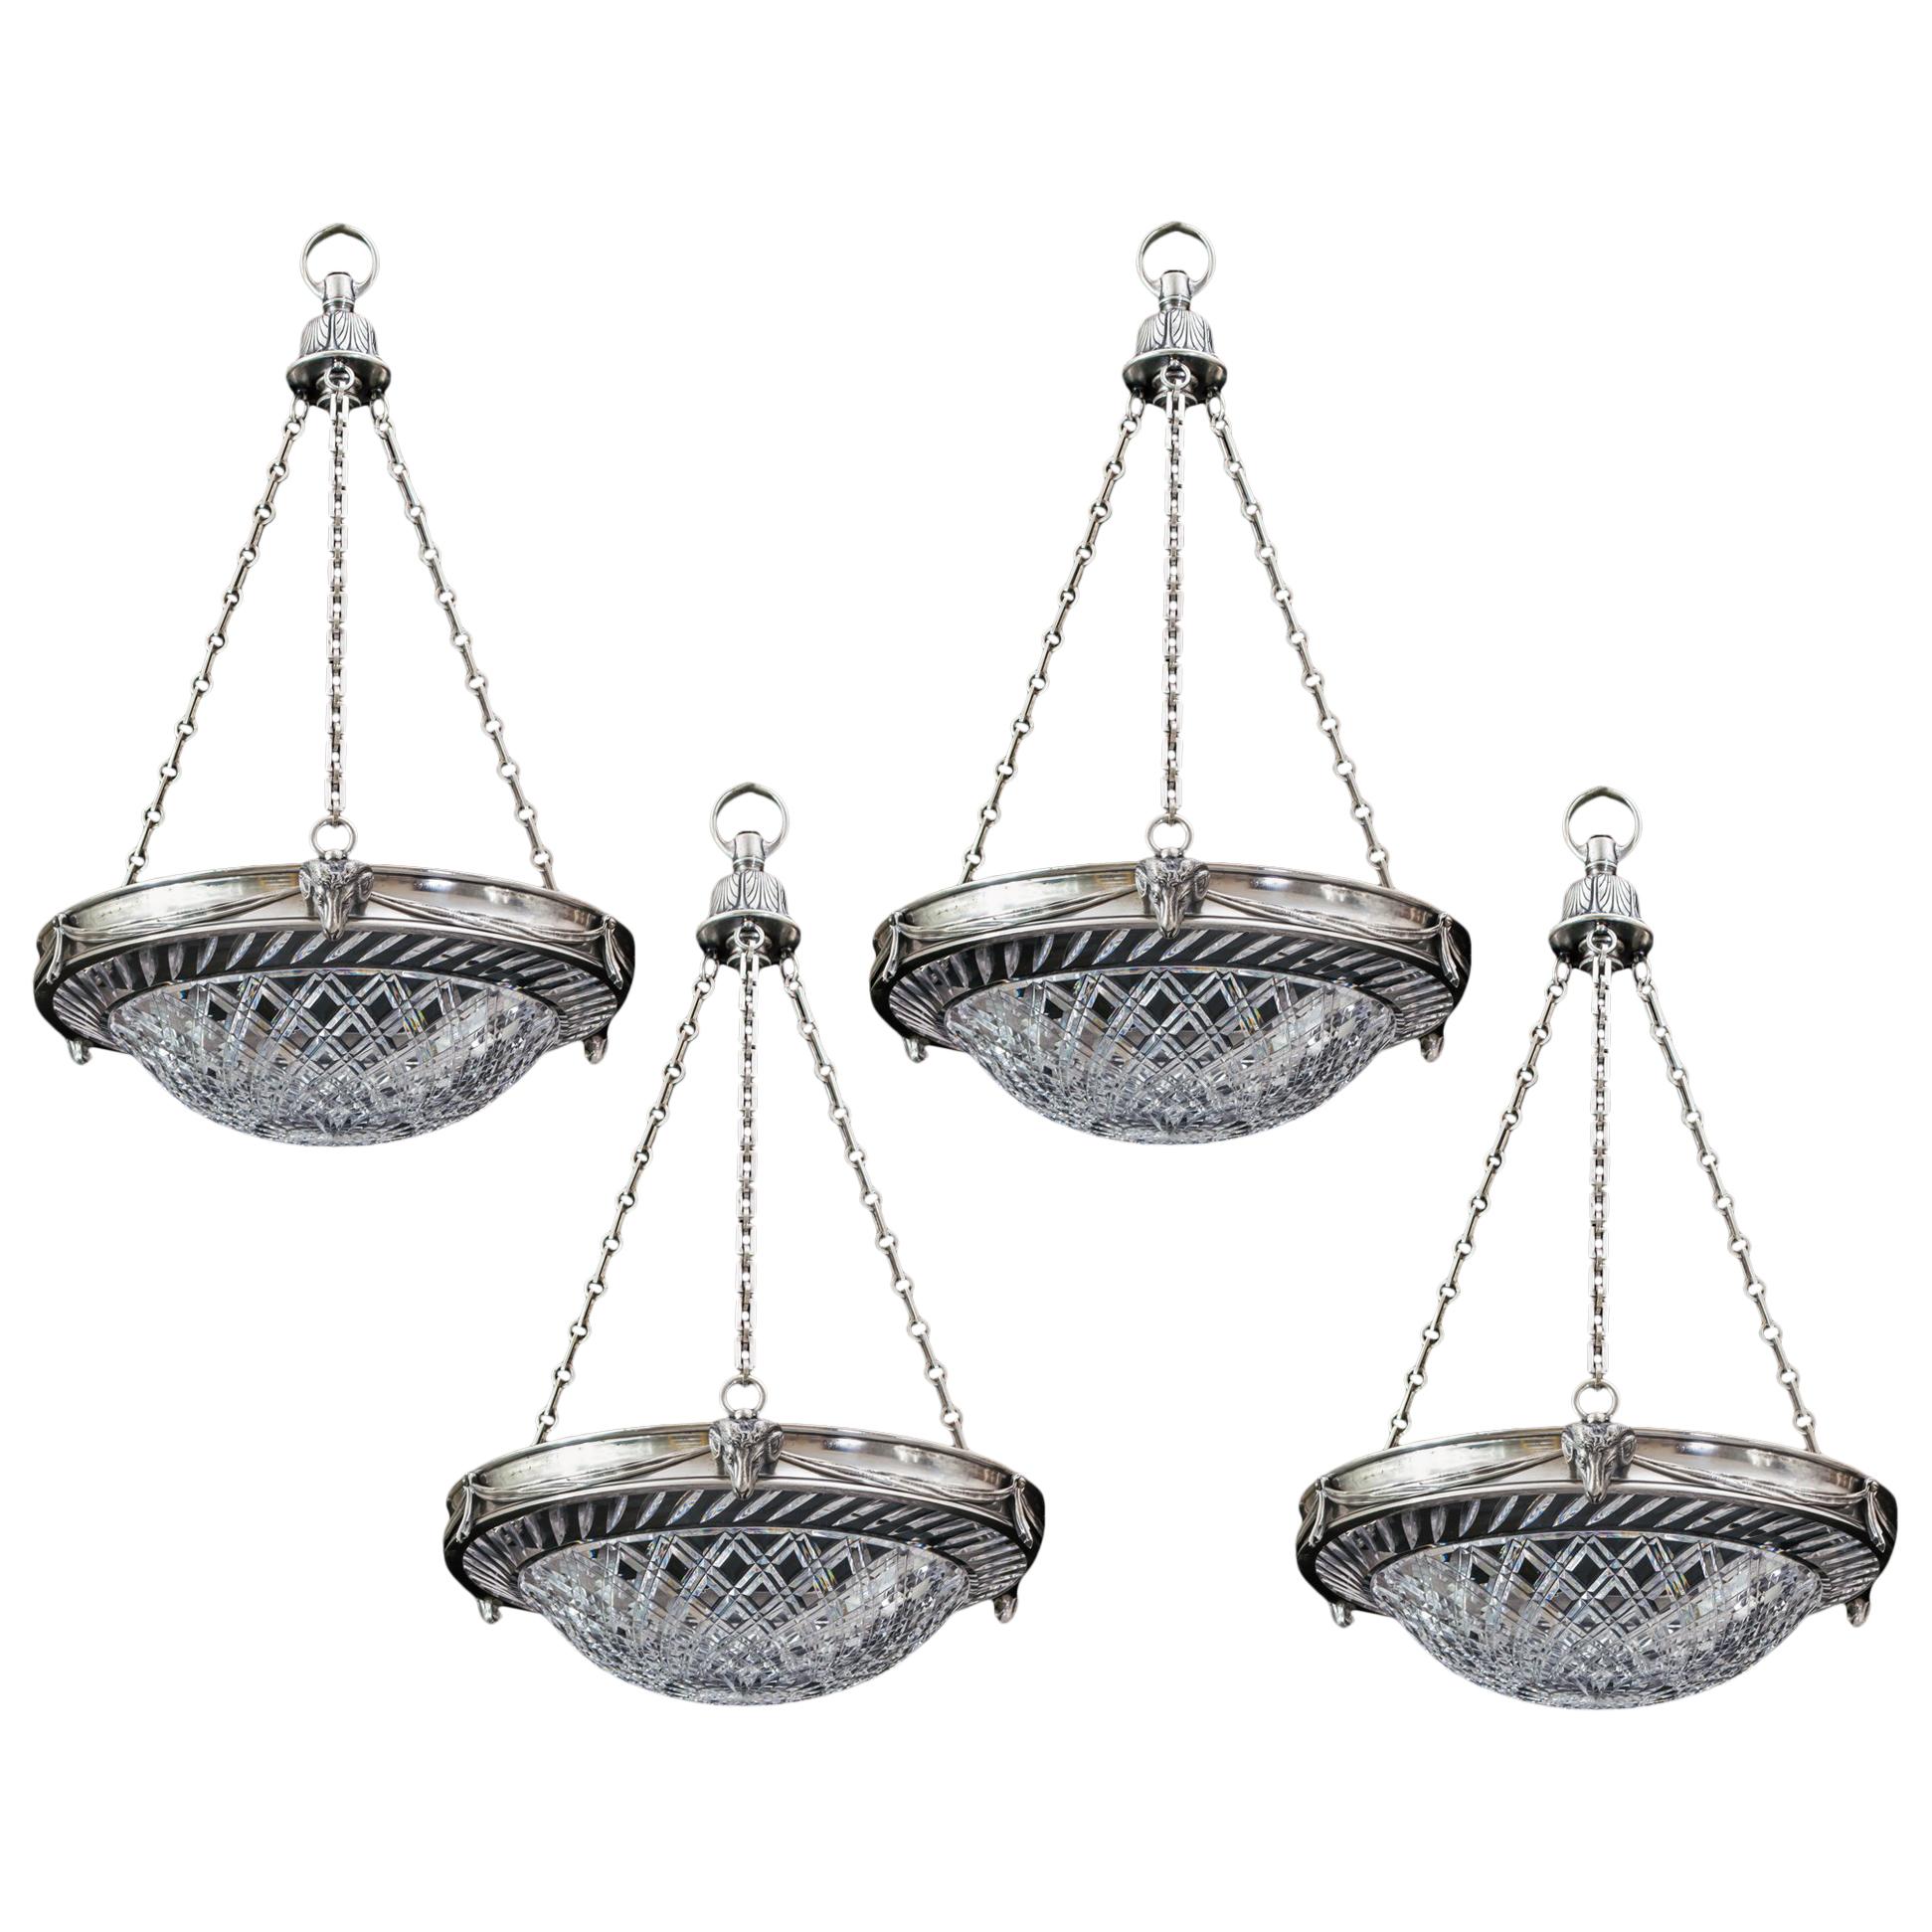 Set of Four Cut Glass Silver Mounted Dish Lights by F&C Osler